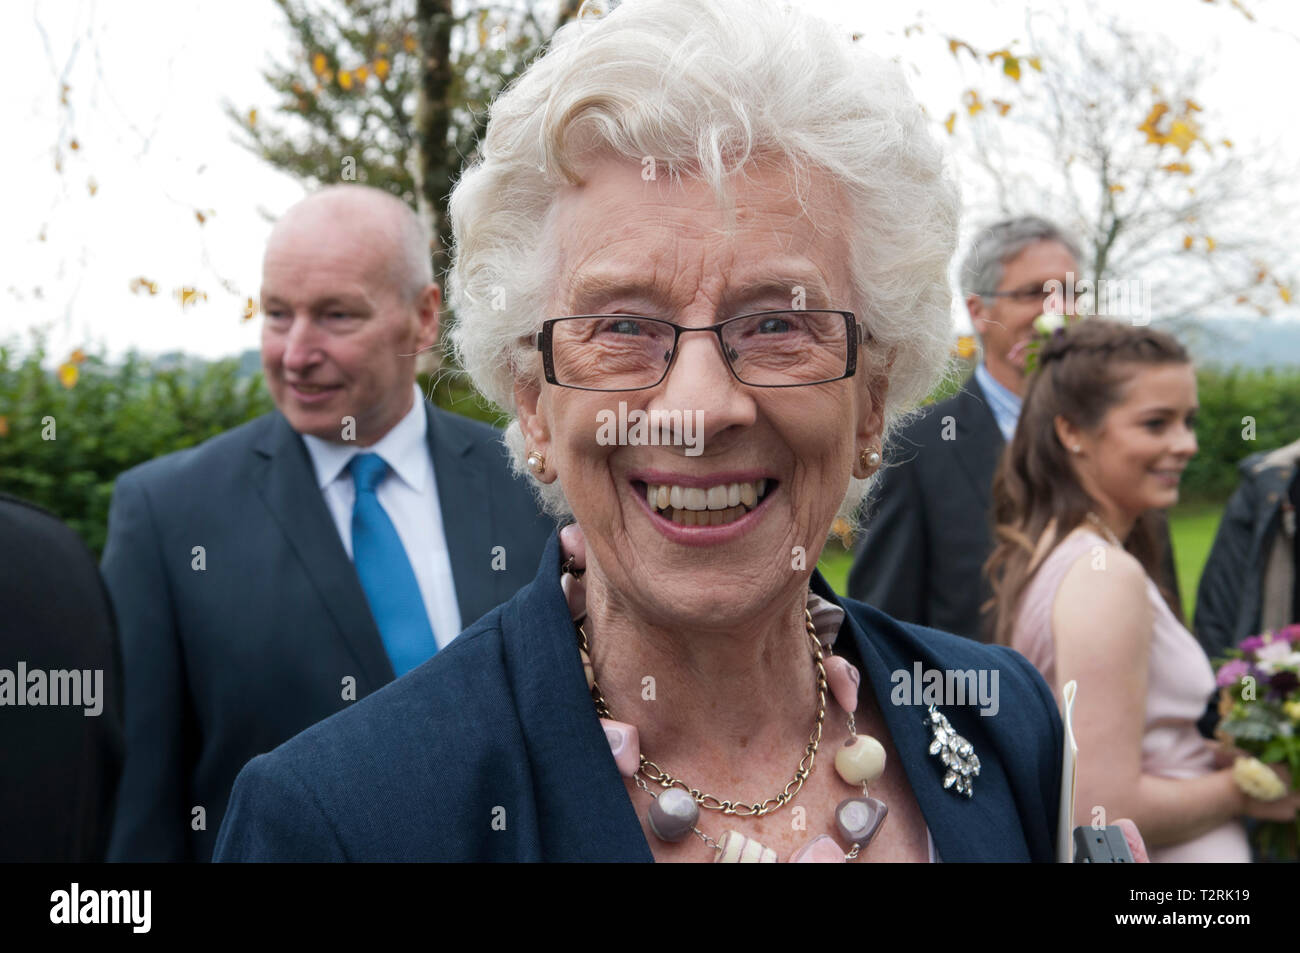 Portrait of happy smiling elderly woman at a special occasion Stock Photo